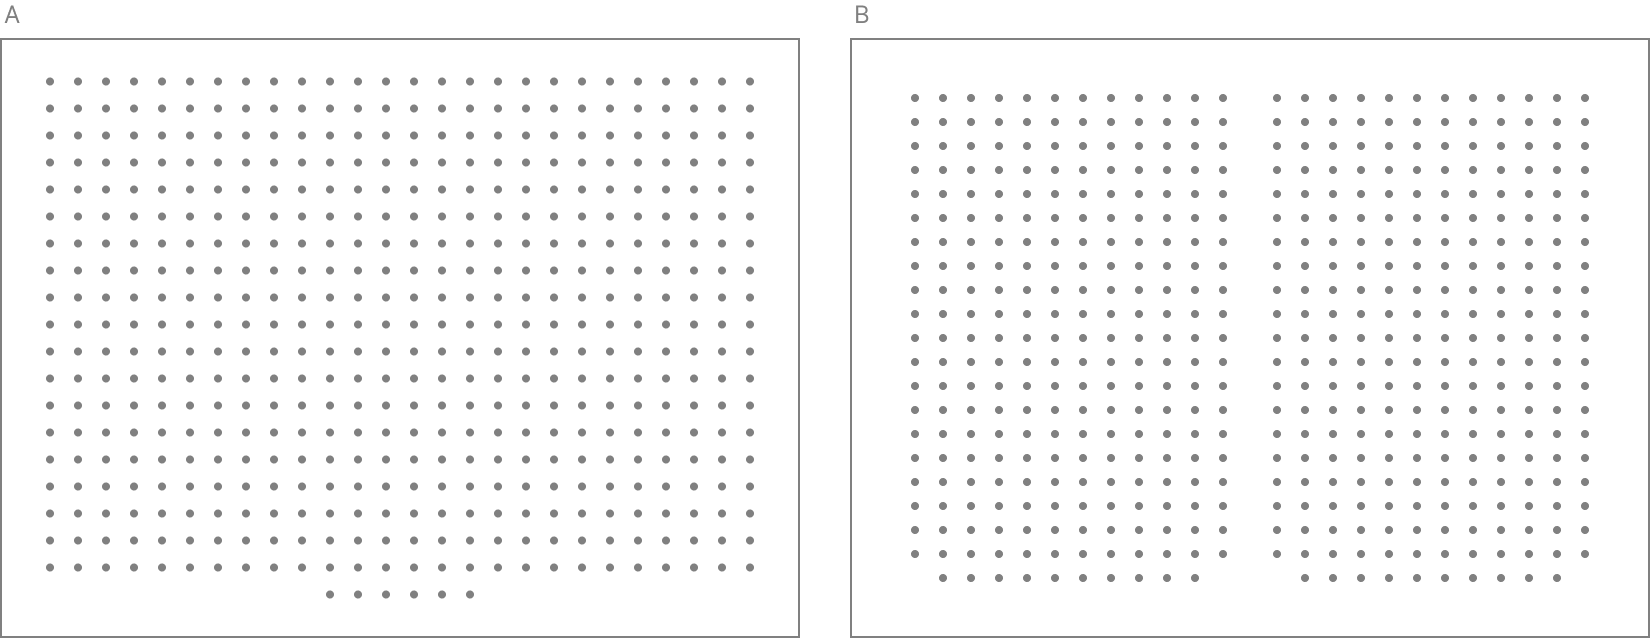 Two rectangles. On the left, the rectangle is filled with many dots that are neatly arranged in rows and columns. On the right, the rectangle is filled with an equal number of dots, arranged in two distinct groups of neatly-ordered dots.